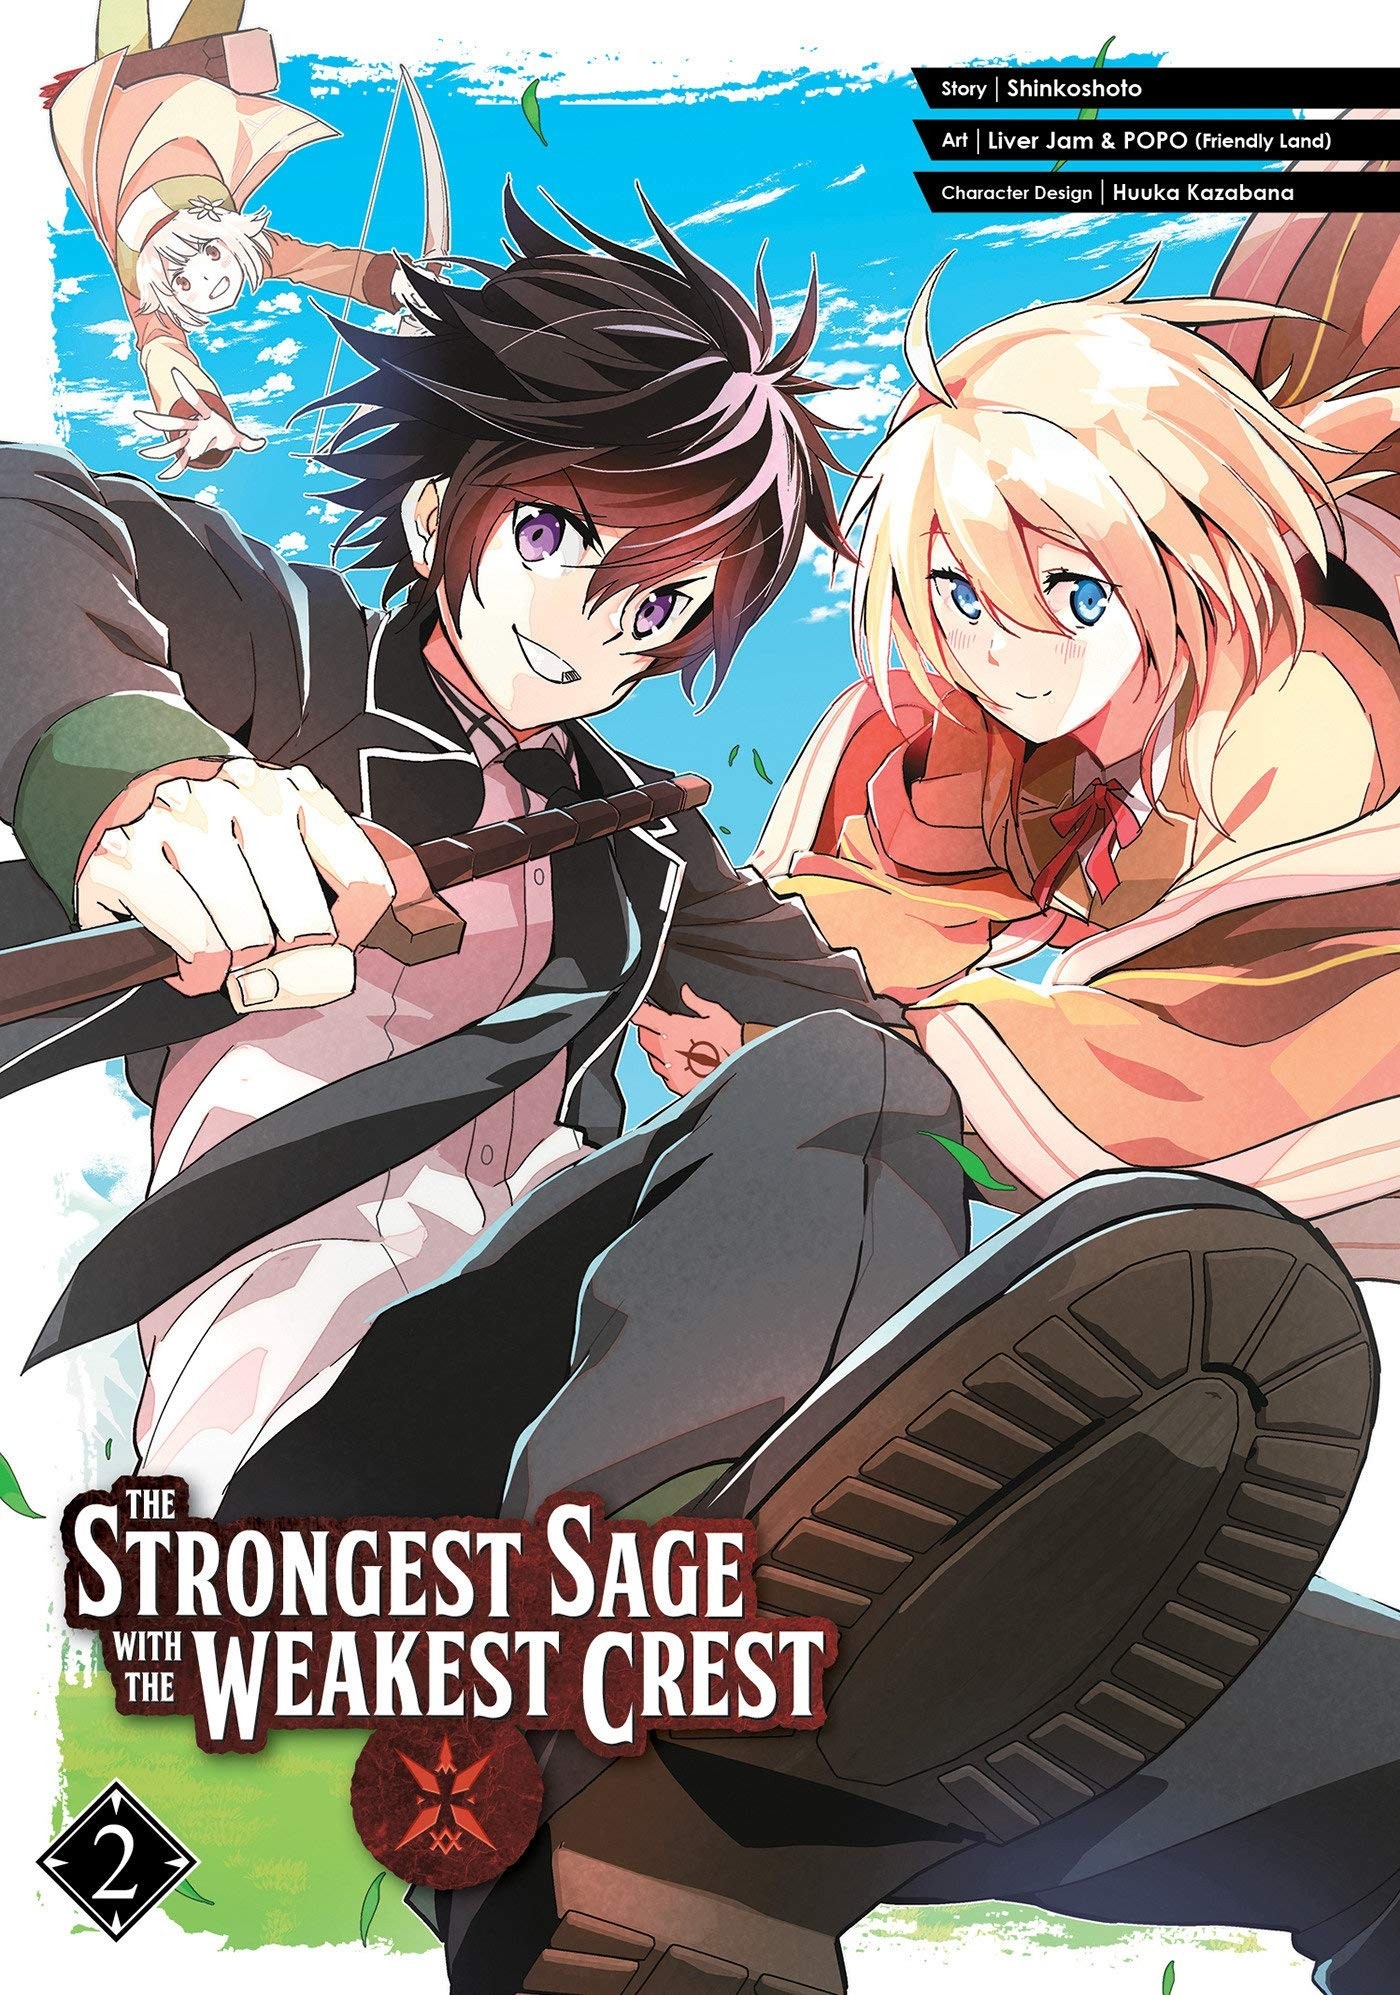 The Strongest Sage with the Weakest Crest, Vol. 02